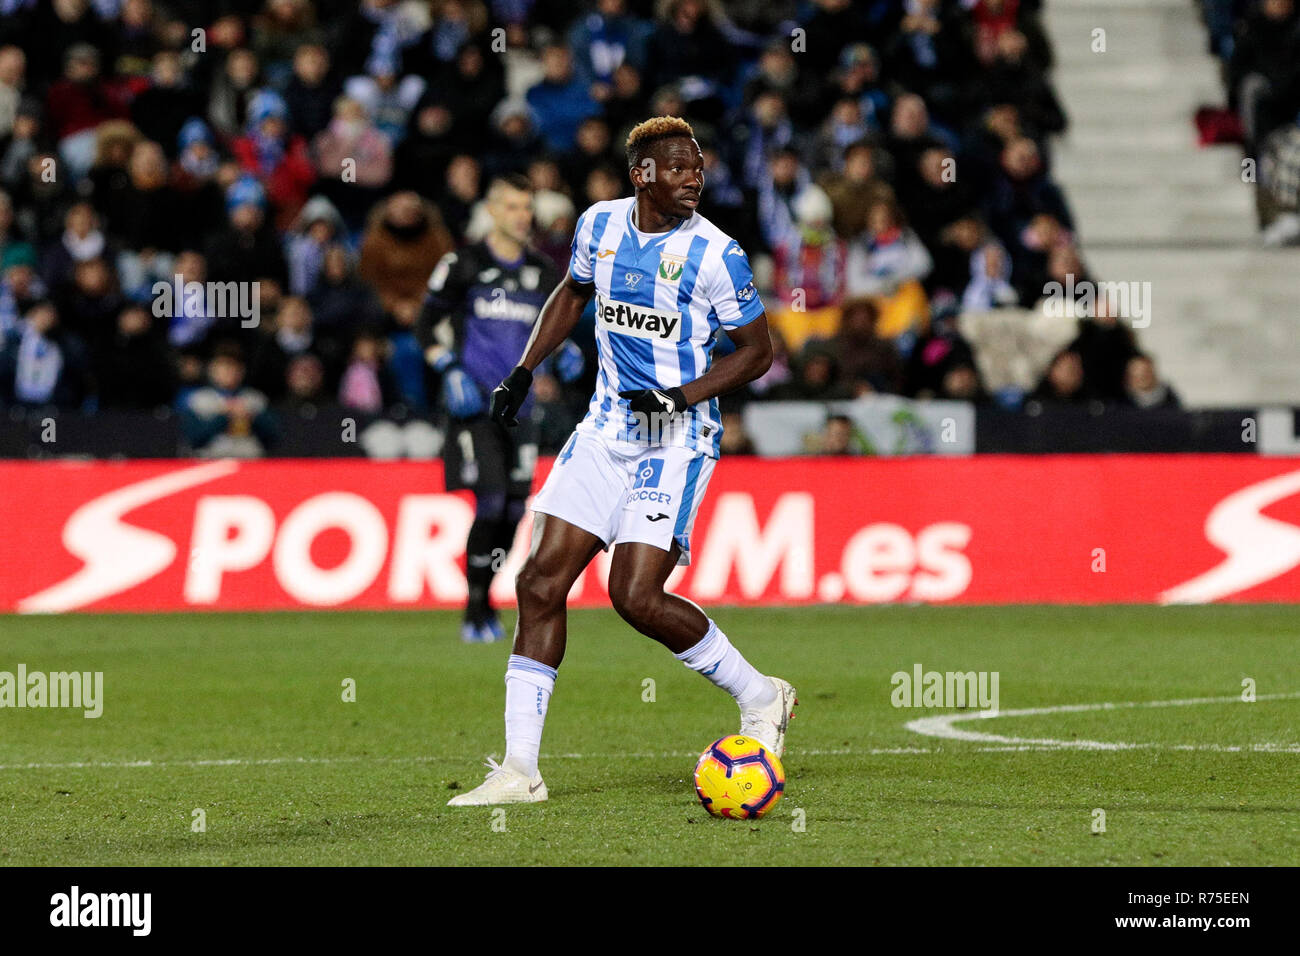 CD Leganes' Kenneth Josiah Omeruo seen in action during the La Liga match between CD Leganes and Getafe CF at Butarque Stadium in Leganes, Spain. (Final score: CD Leganes 1 - 1 Getafe CF) Stock Photo